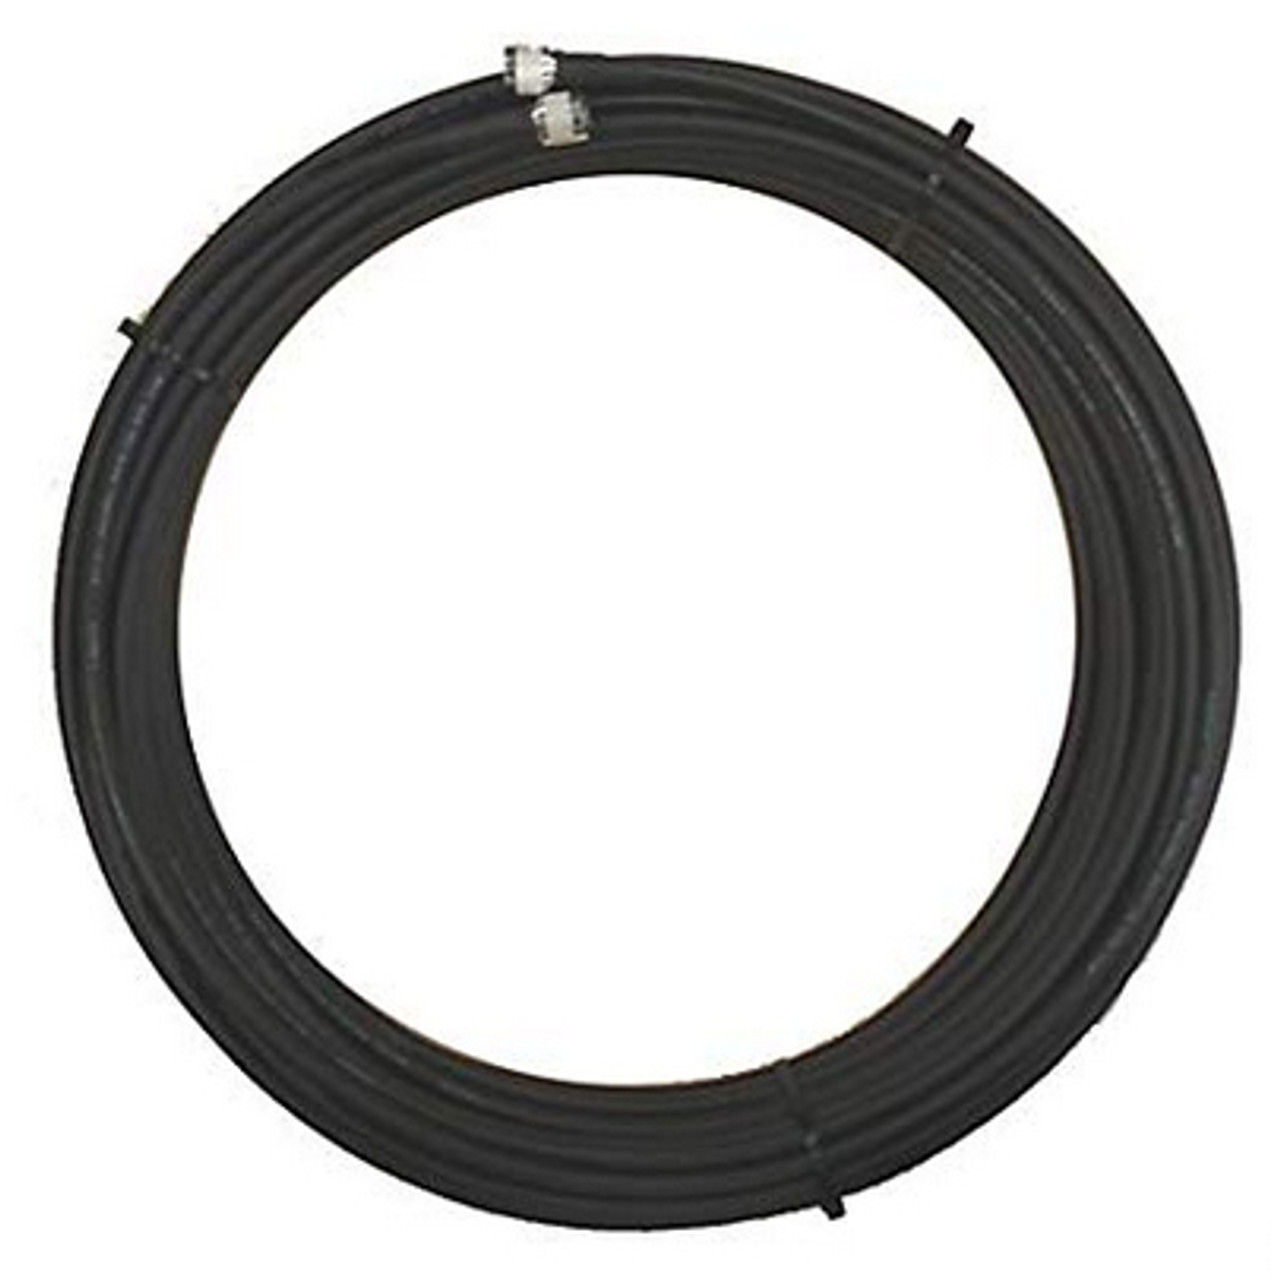 WS-CAB-L600C25N | Extreme networks | LMR600 coaxial cable 300" (7.62 m) RP-N